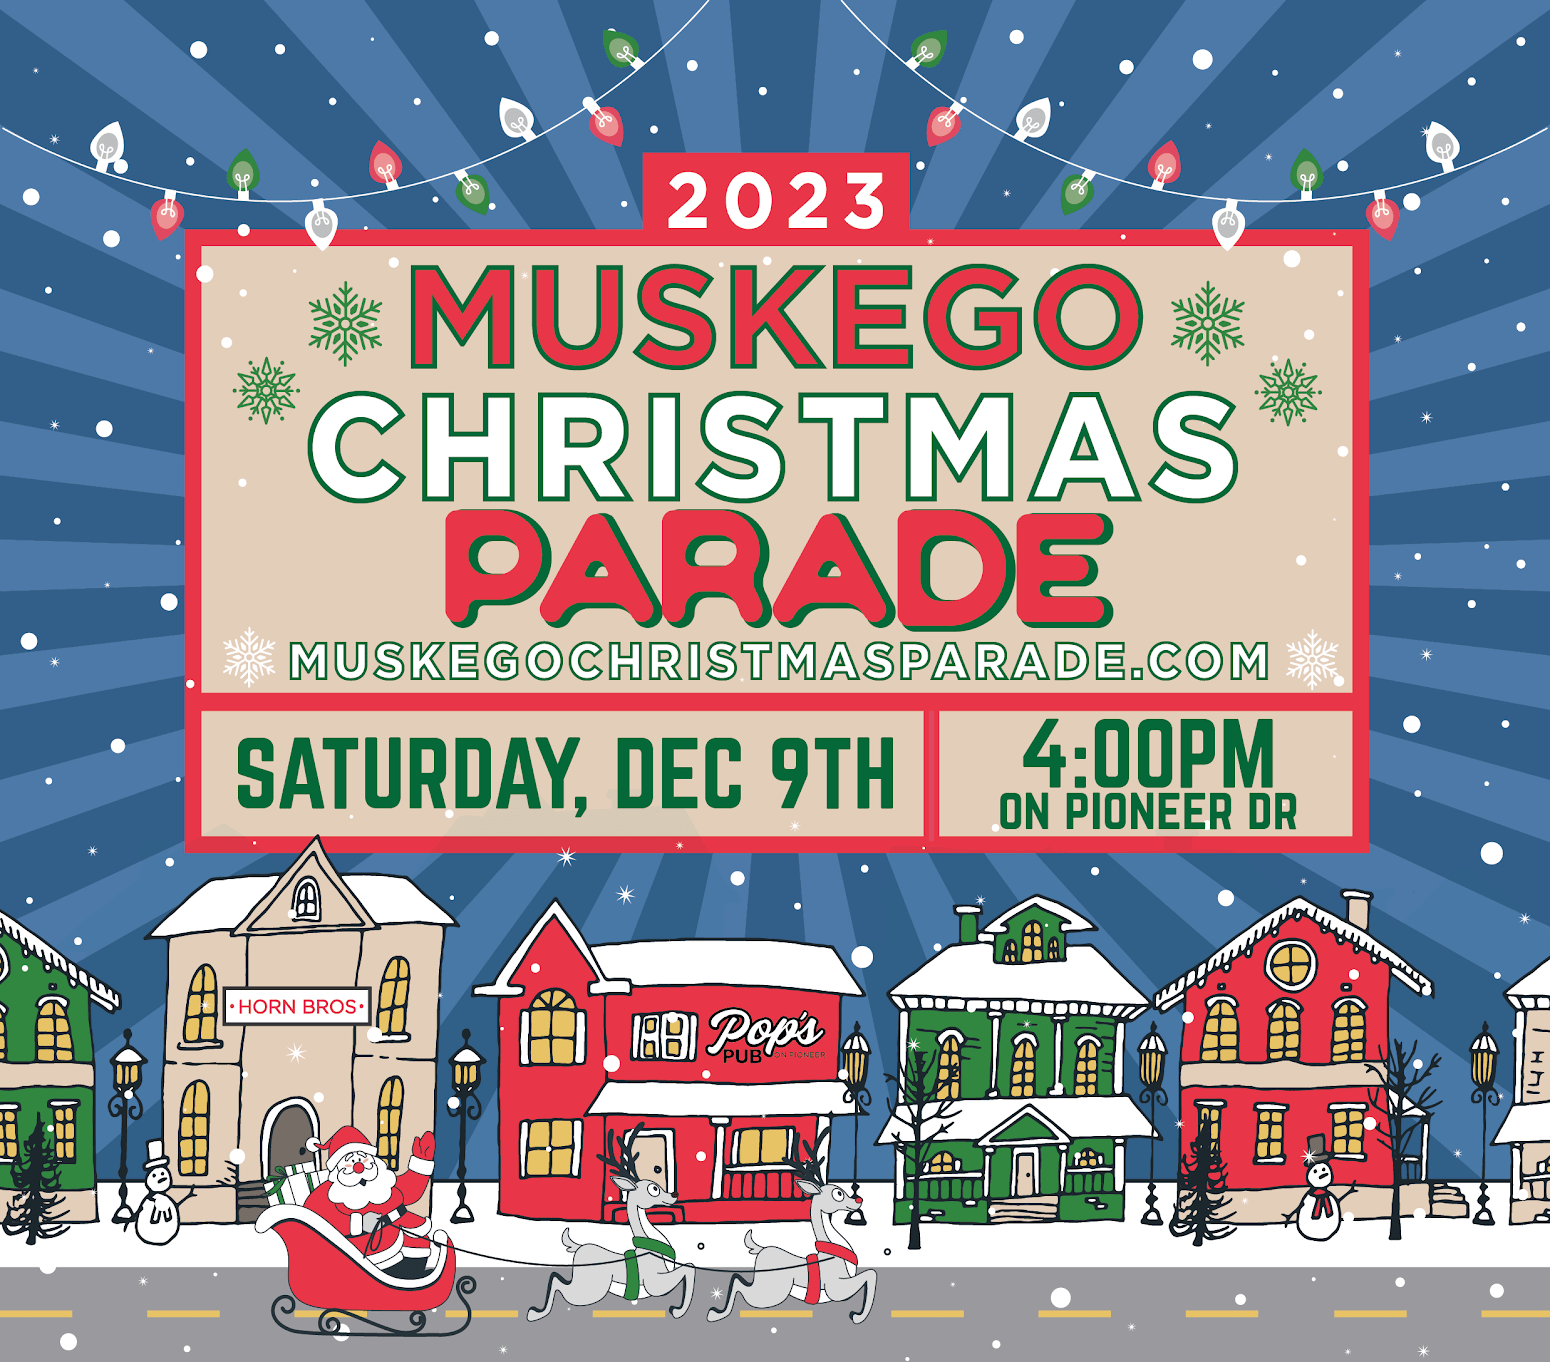 muskego christmas parade 2023 schedule